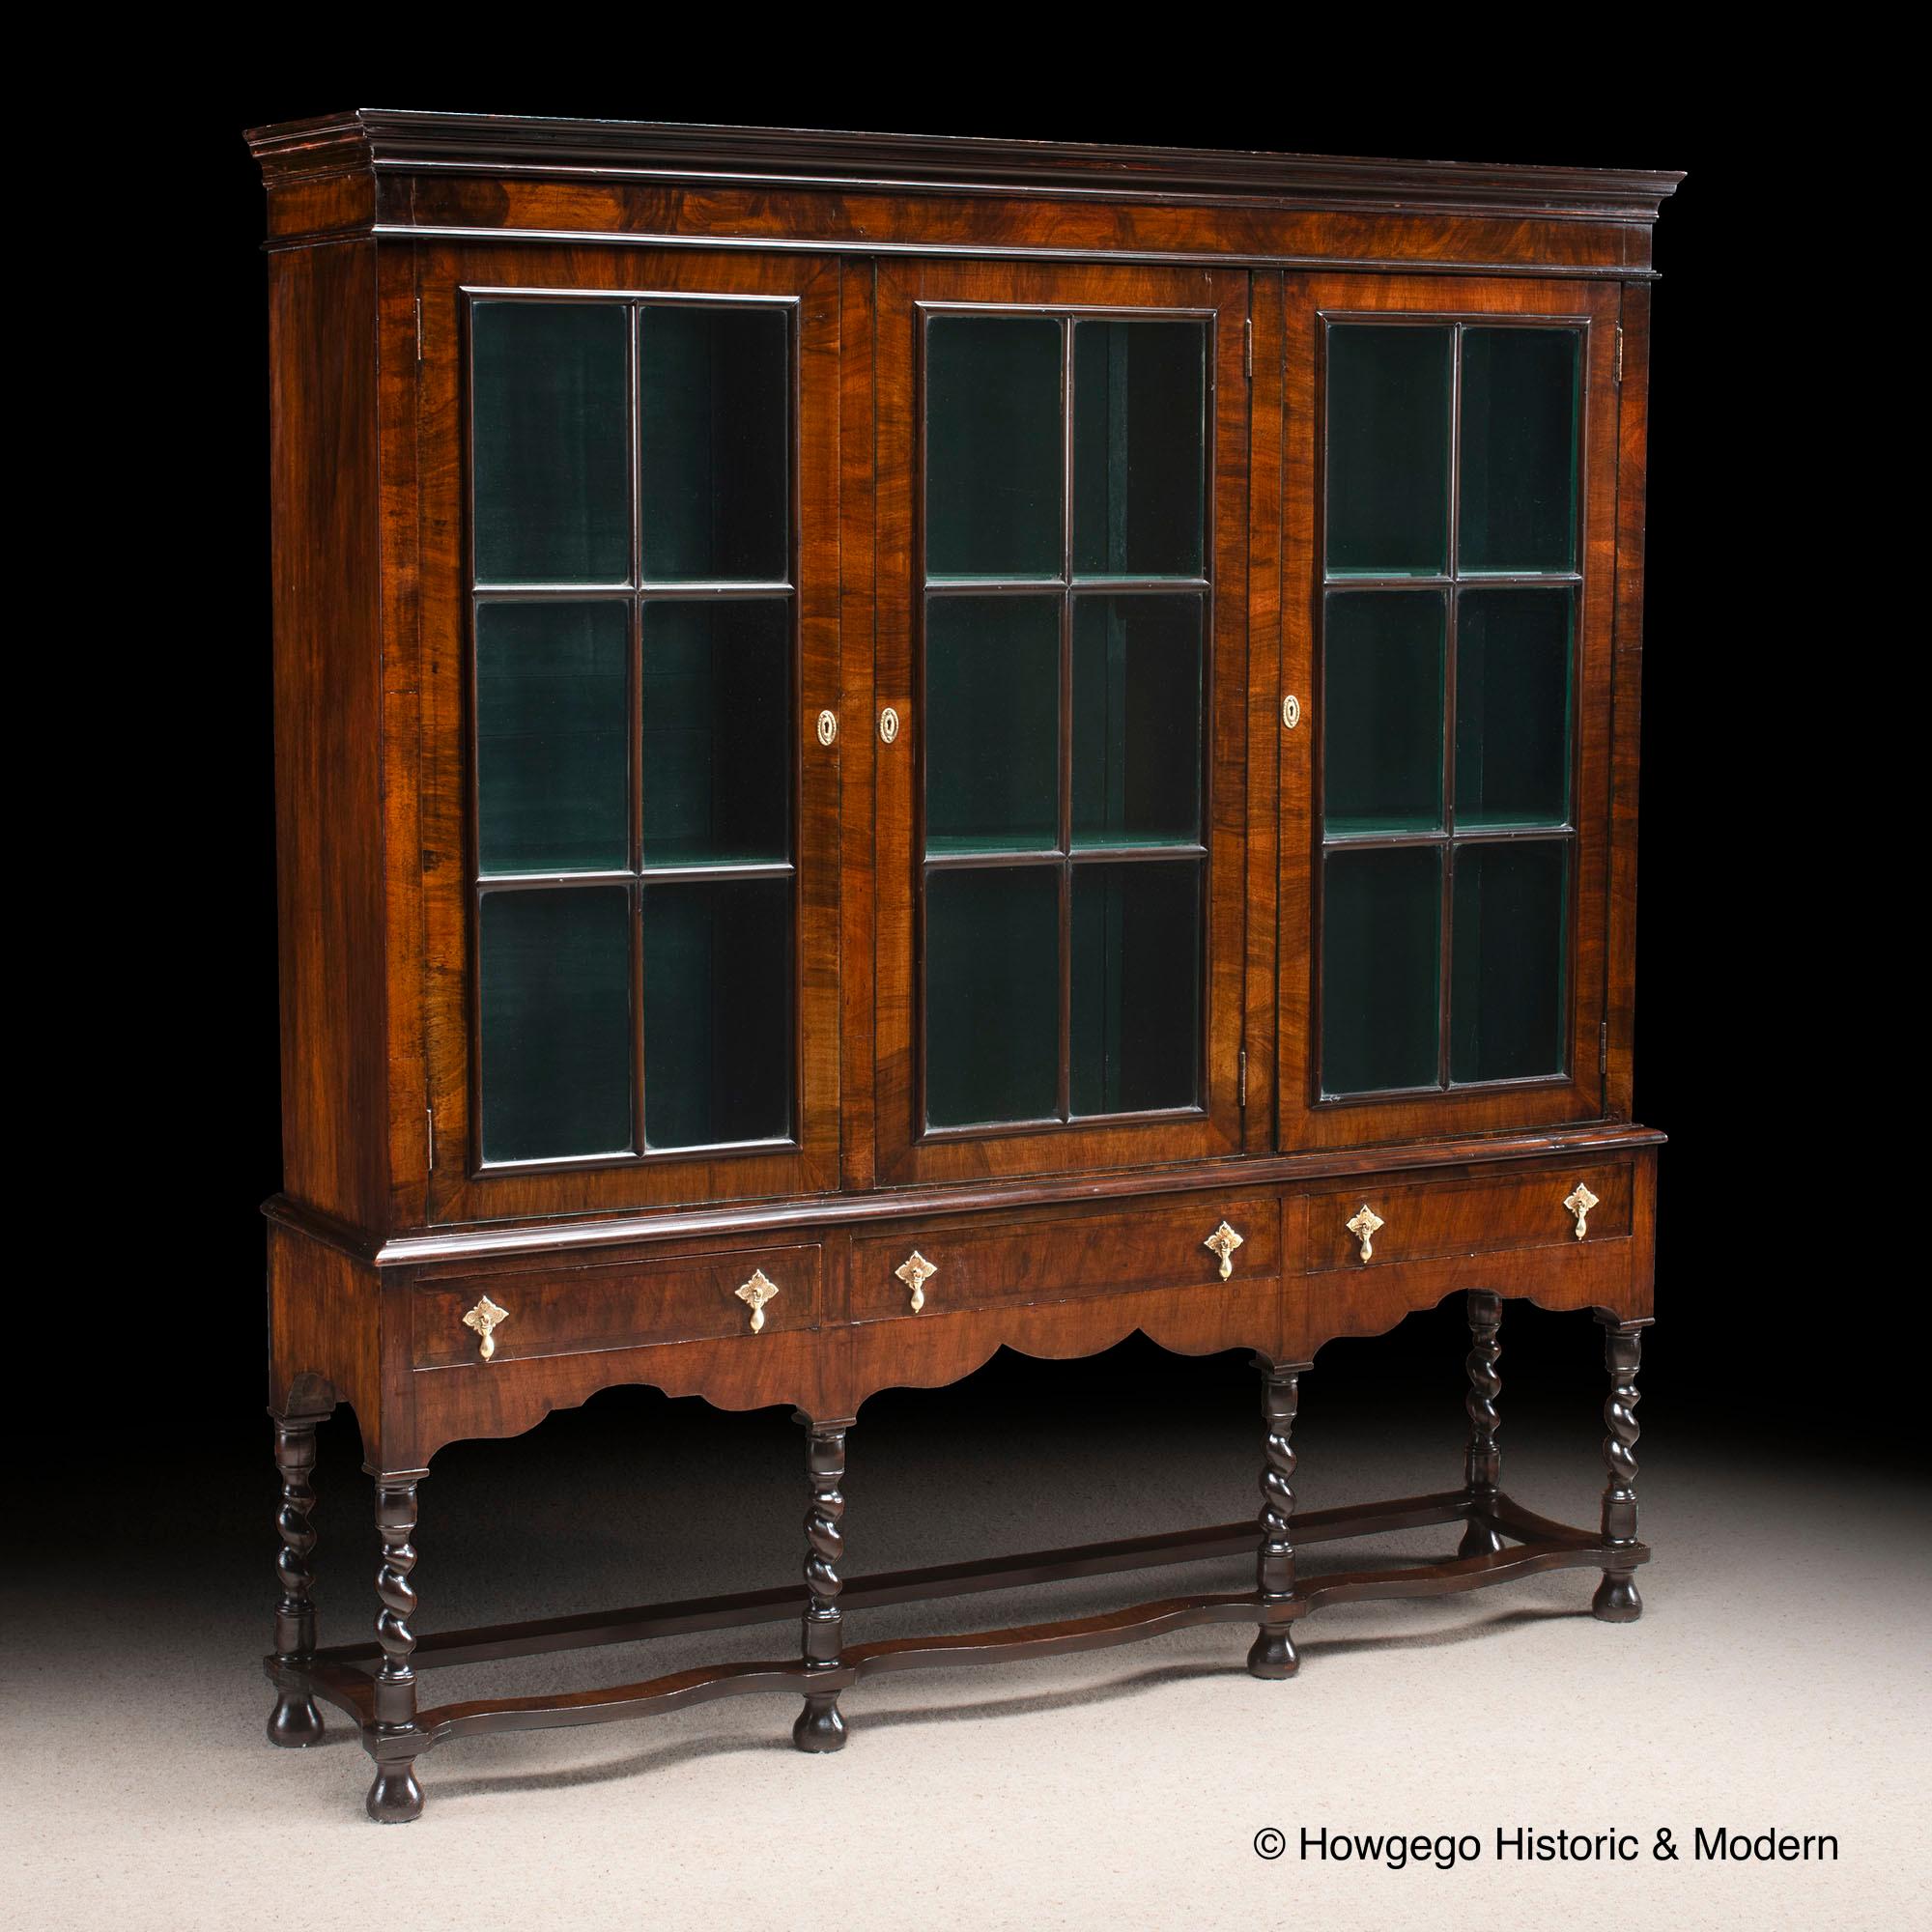 Unusual, antiquarian, glazed, display cabinet or bookcase on stand in the Baroque-Style most likely made for a formal interior
Beautifully made walnut cabinet piece using finely figured, crossbanded and engraved brass handles
The shaped stand has